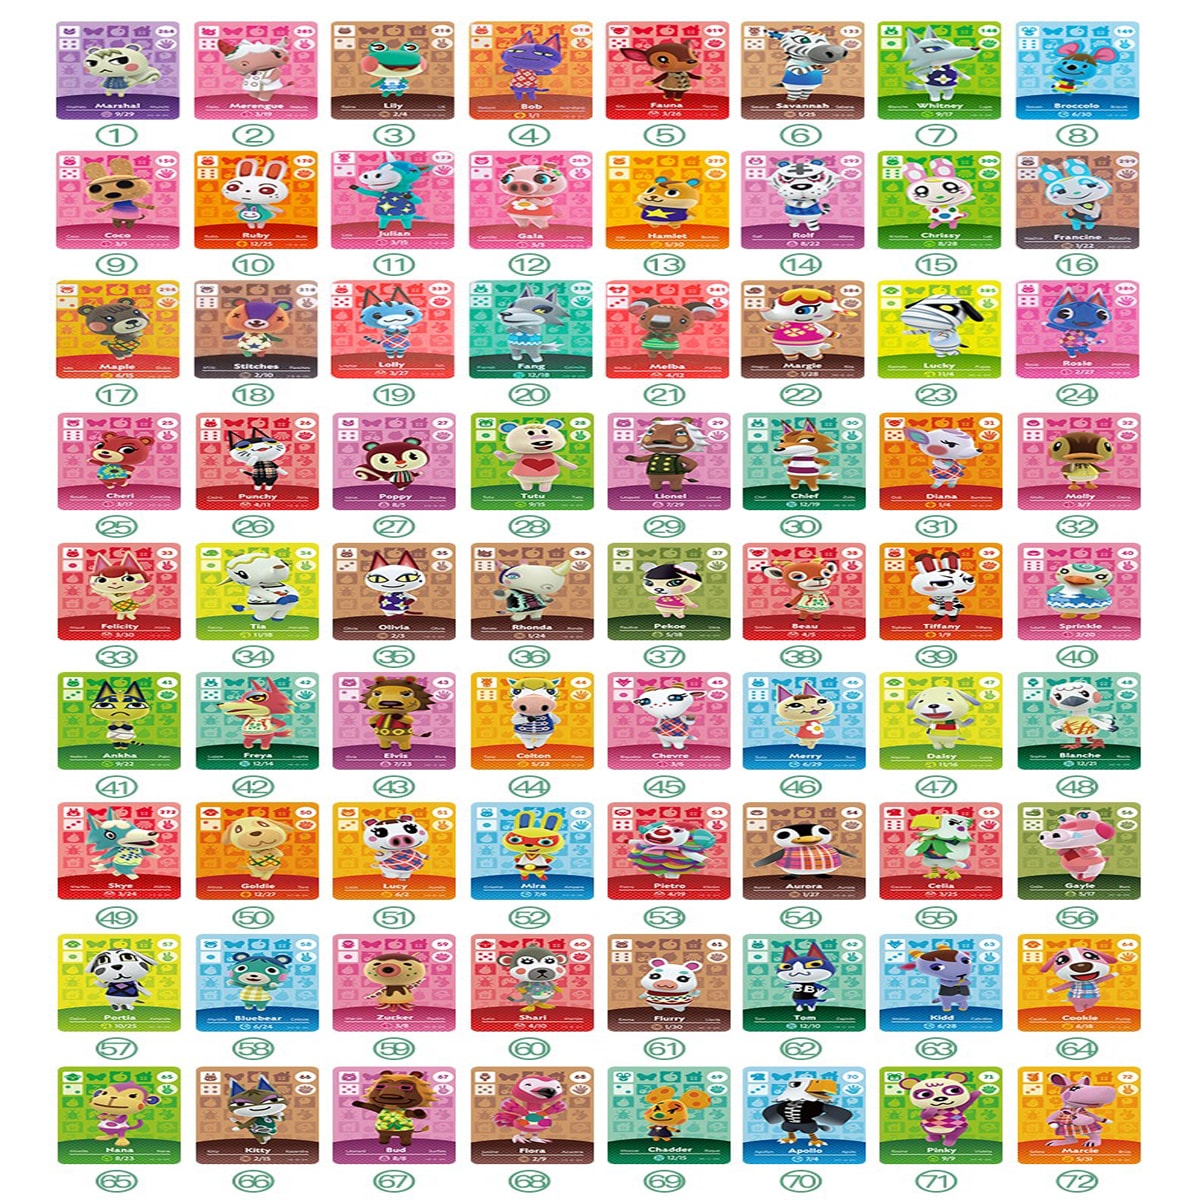 72pcs Amiibo Tiny Villager Invite Cards NFC Game Cards Animal Crossing for Switch/Switch Lite/Wii U New 3DS Nintendo Switch Gaming - 1